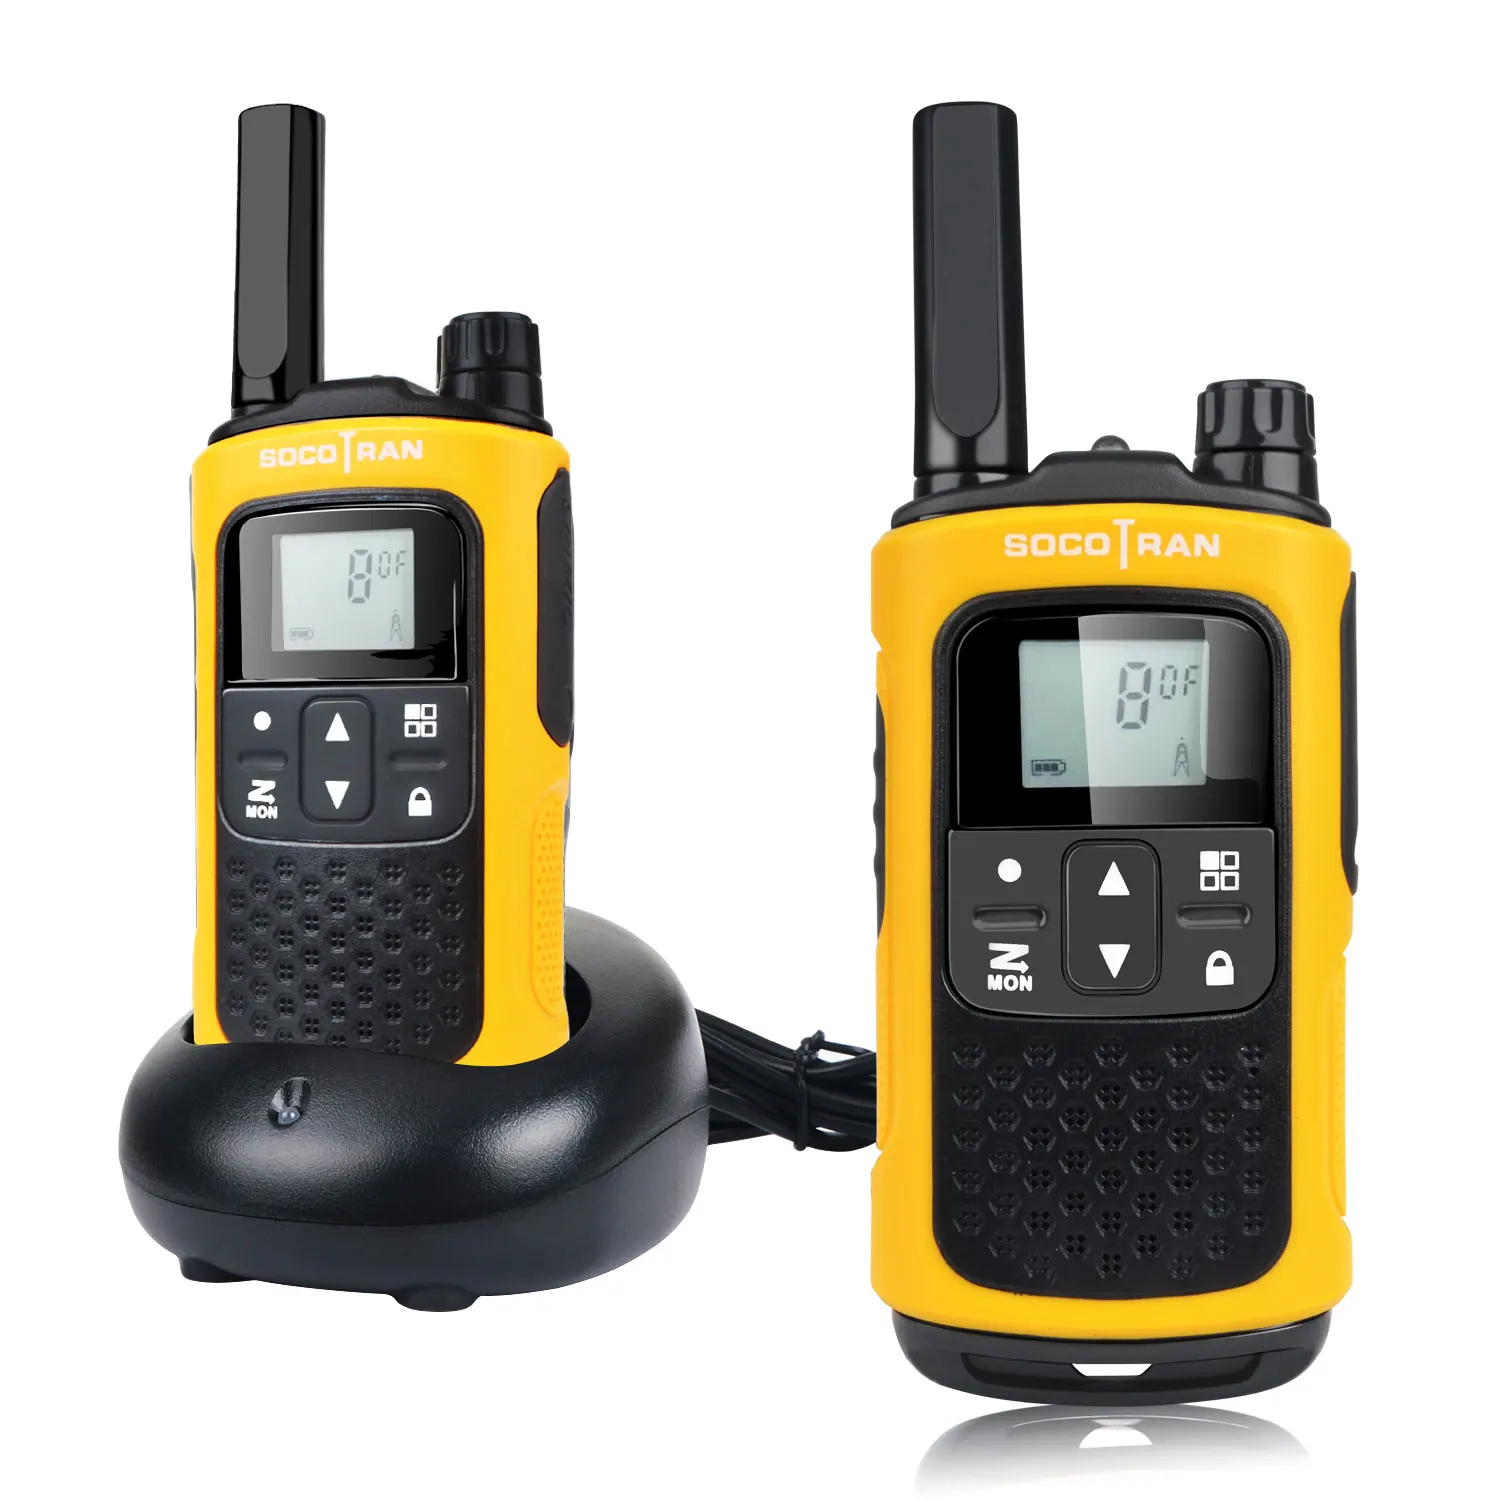 

Long Range Rechargeable Two Way Radio PMR446 License Free Walkie Talkies Socotran T80 8CH VOX Flashlight Battery Privacy Codes